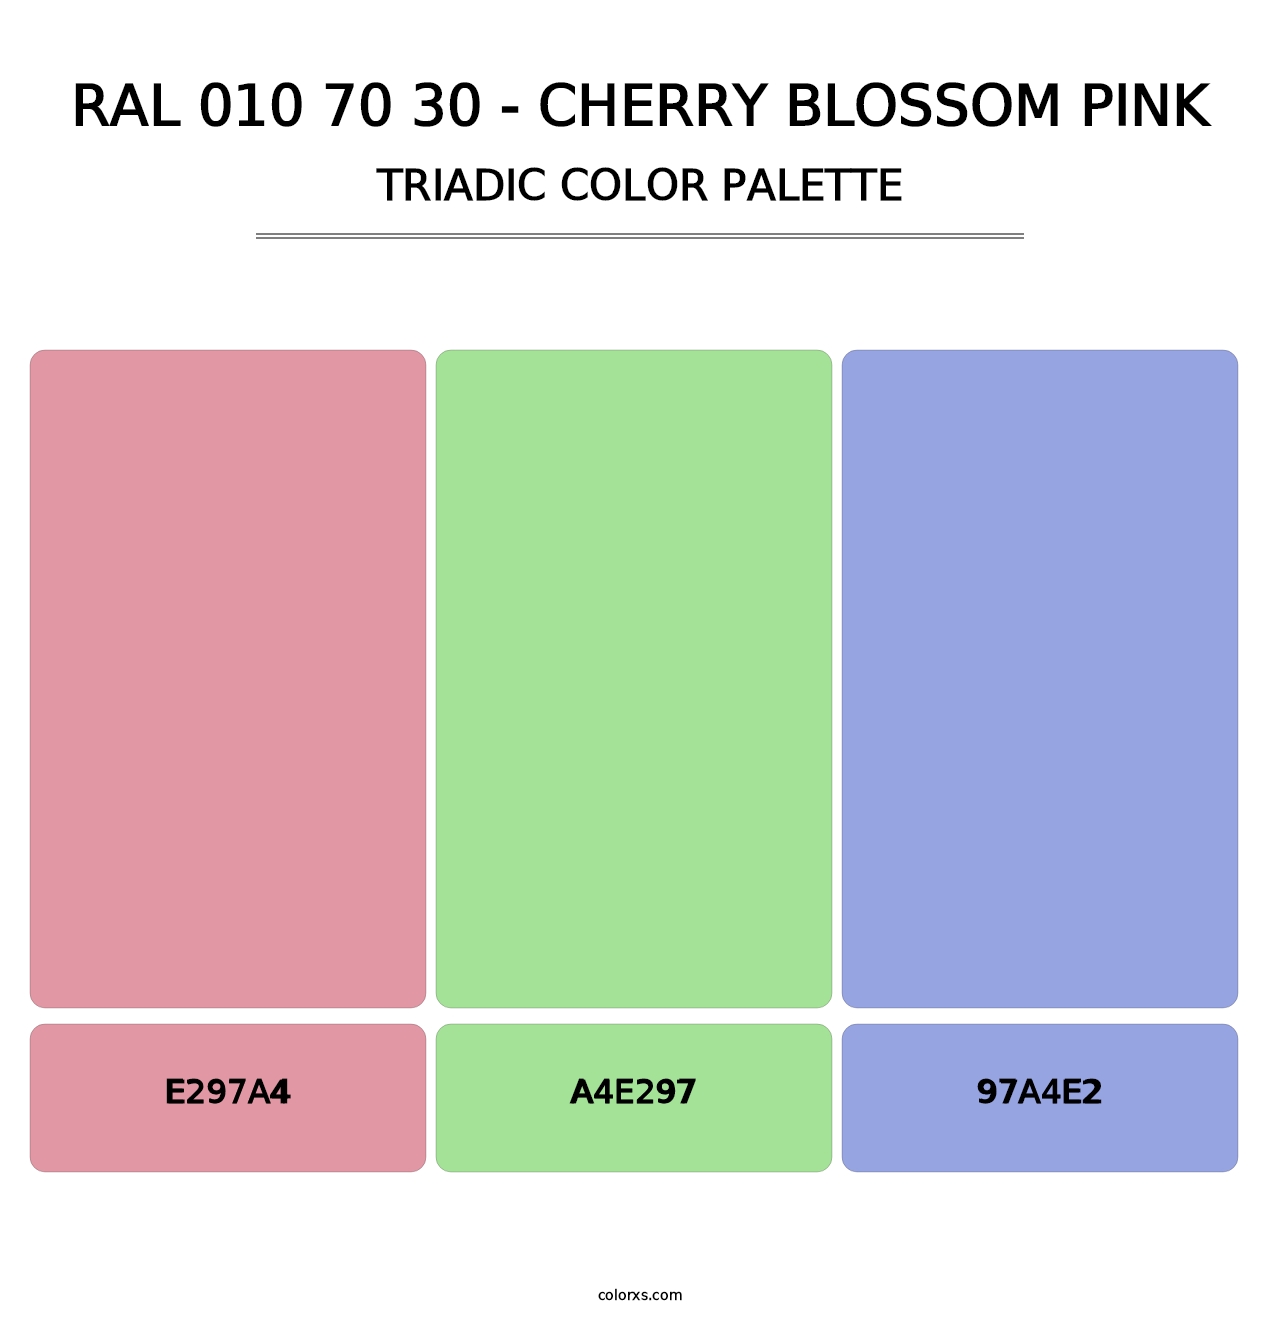 RAL 010 70 30 - Cherry Blossom Pink - Triadic Color Palette